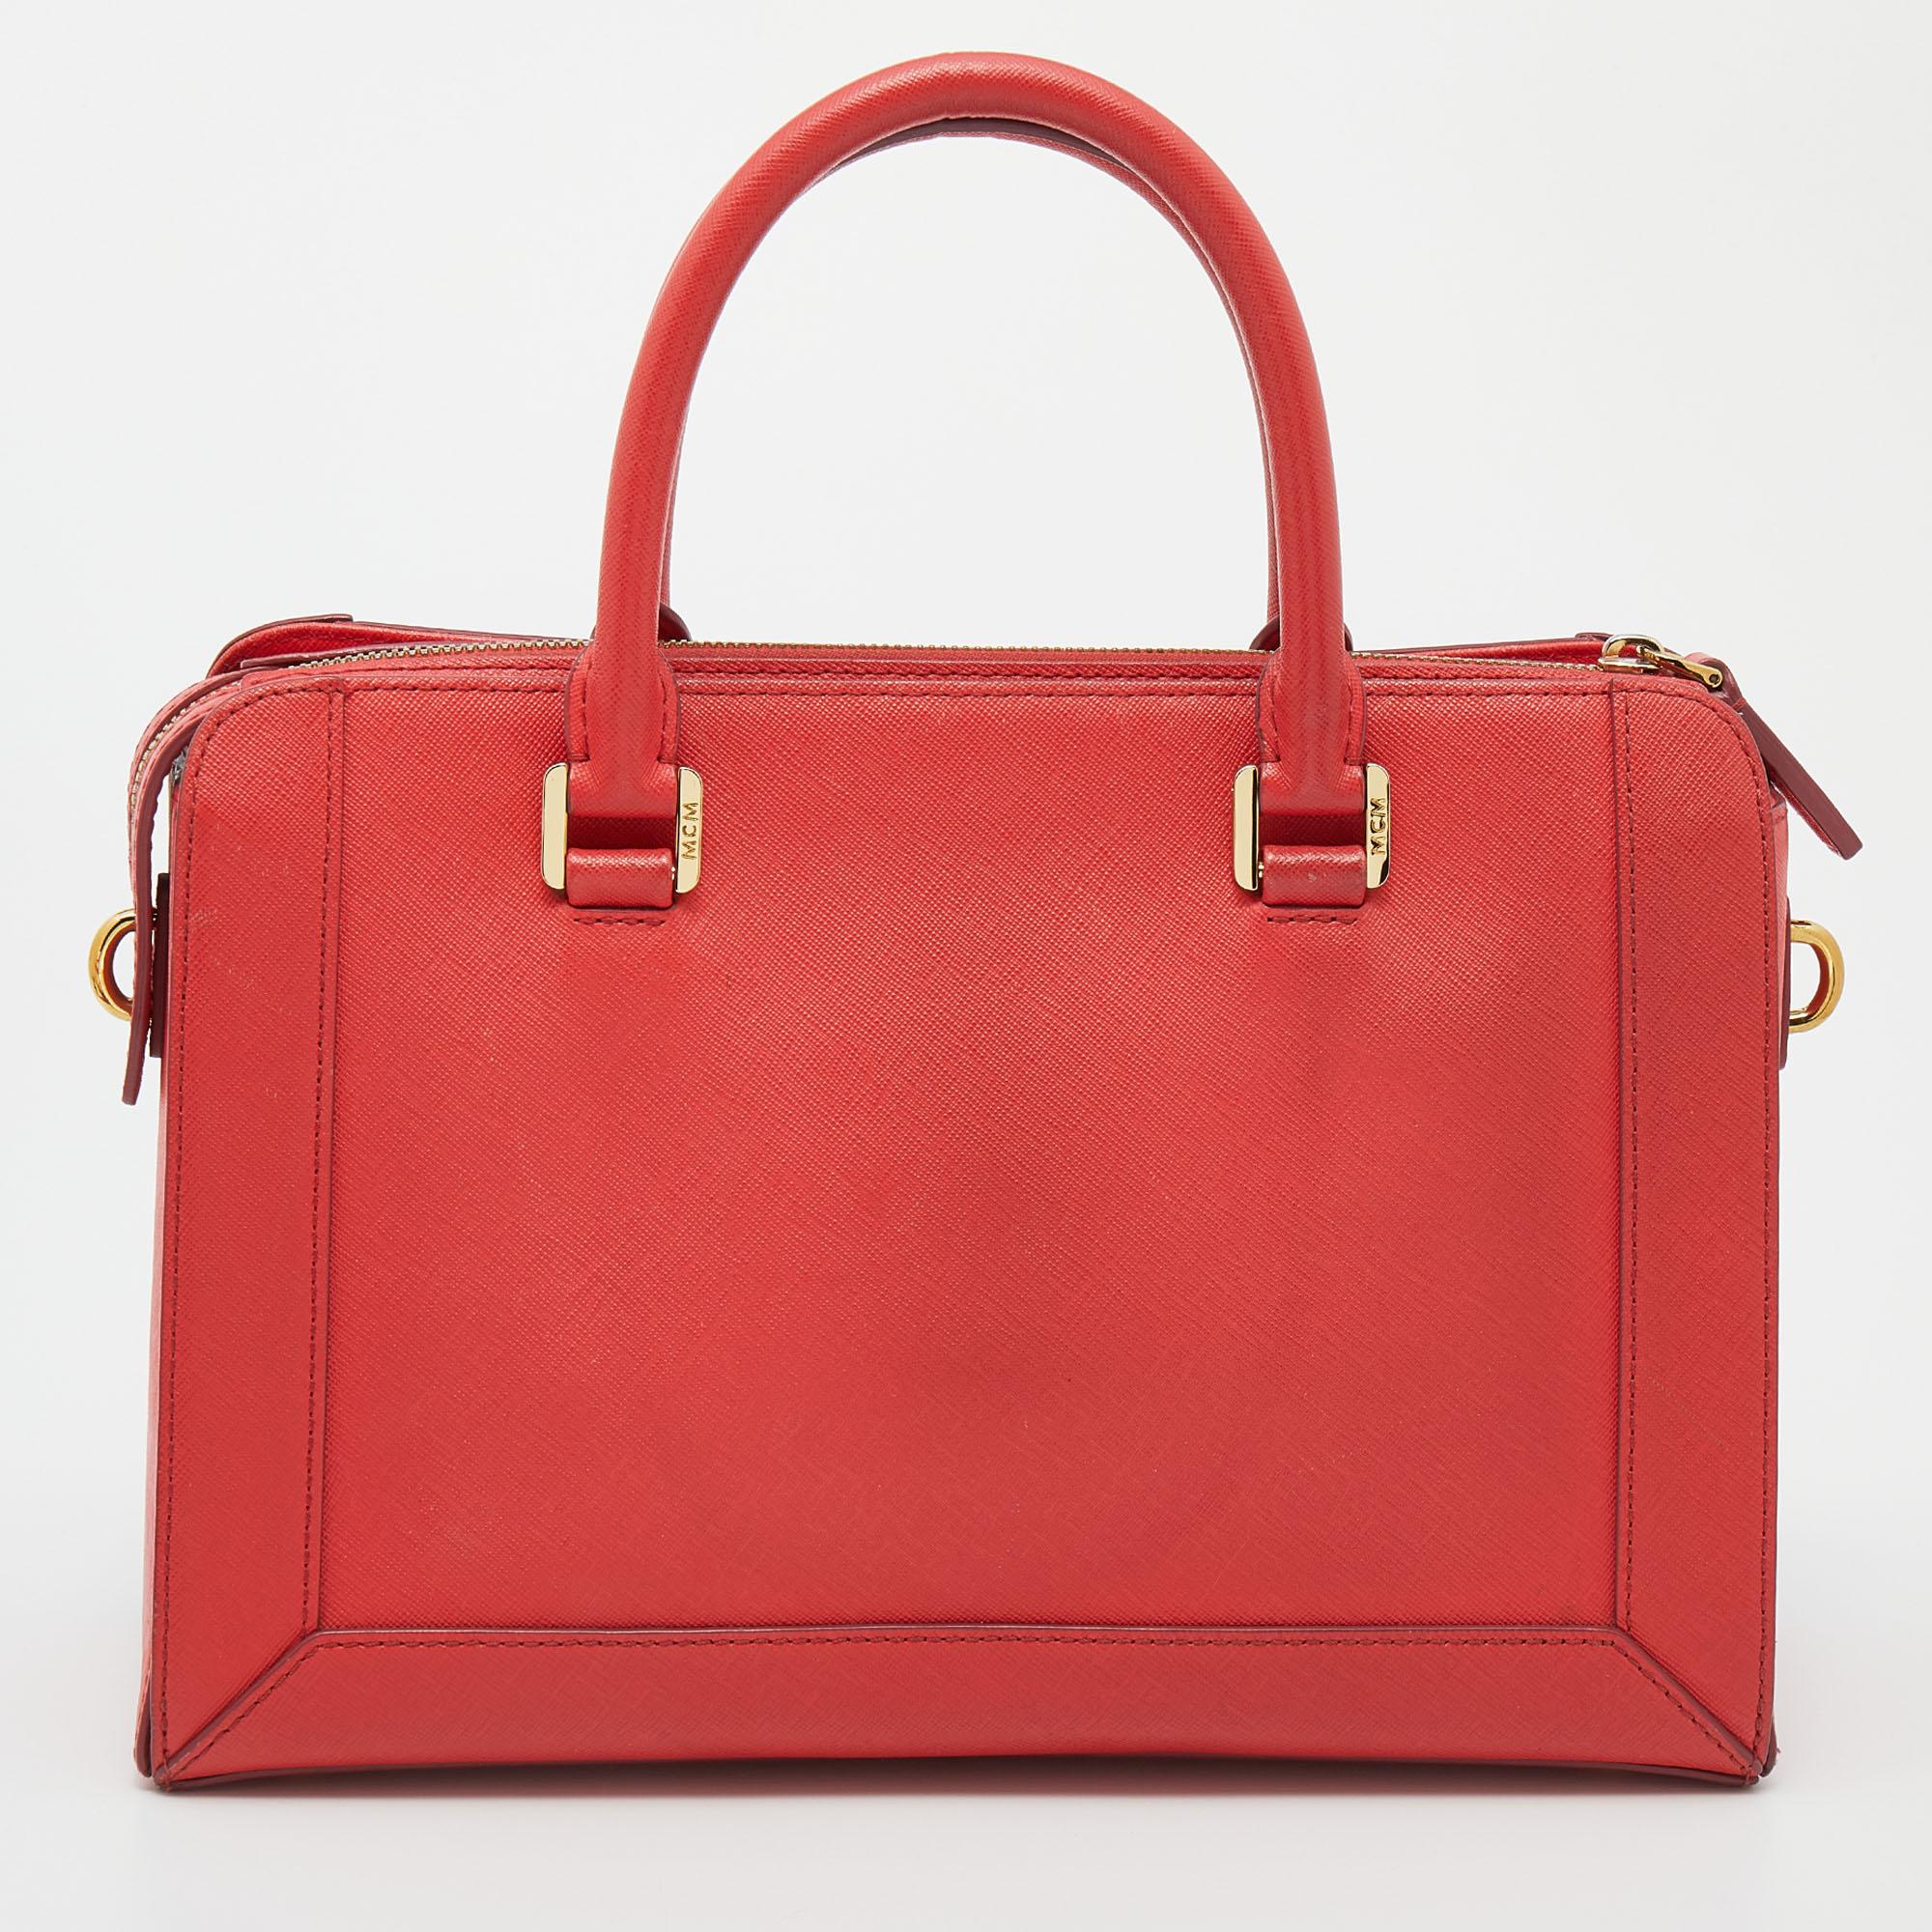 The MCM tote is ideal for those who commute daily, love shopping, and travel often. Made from coral leather, the creation is highlighted with a front brand plaque and attached with short top handles and a shoulder strap. The spacious interior makes